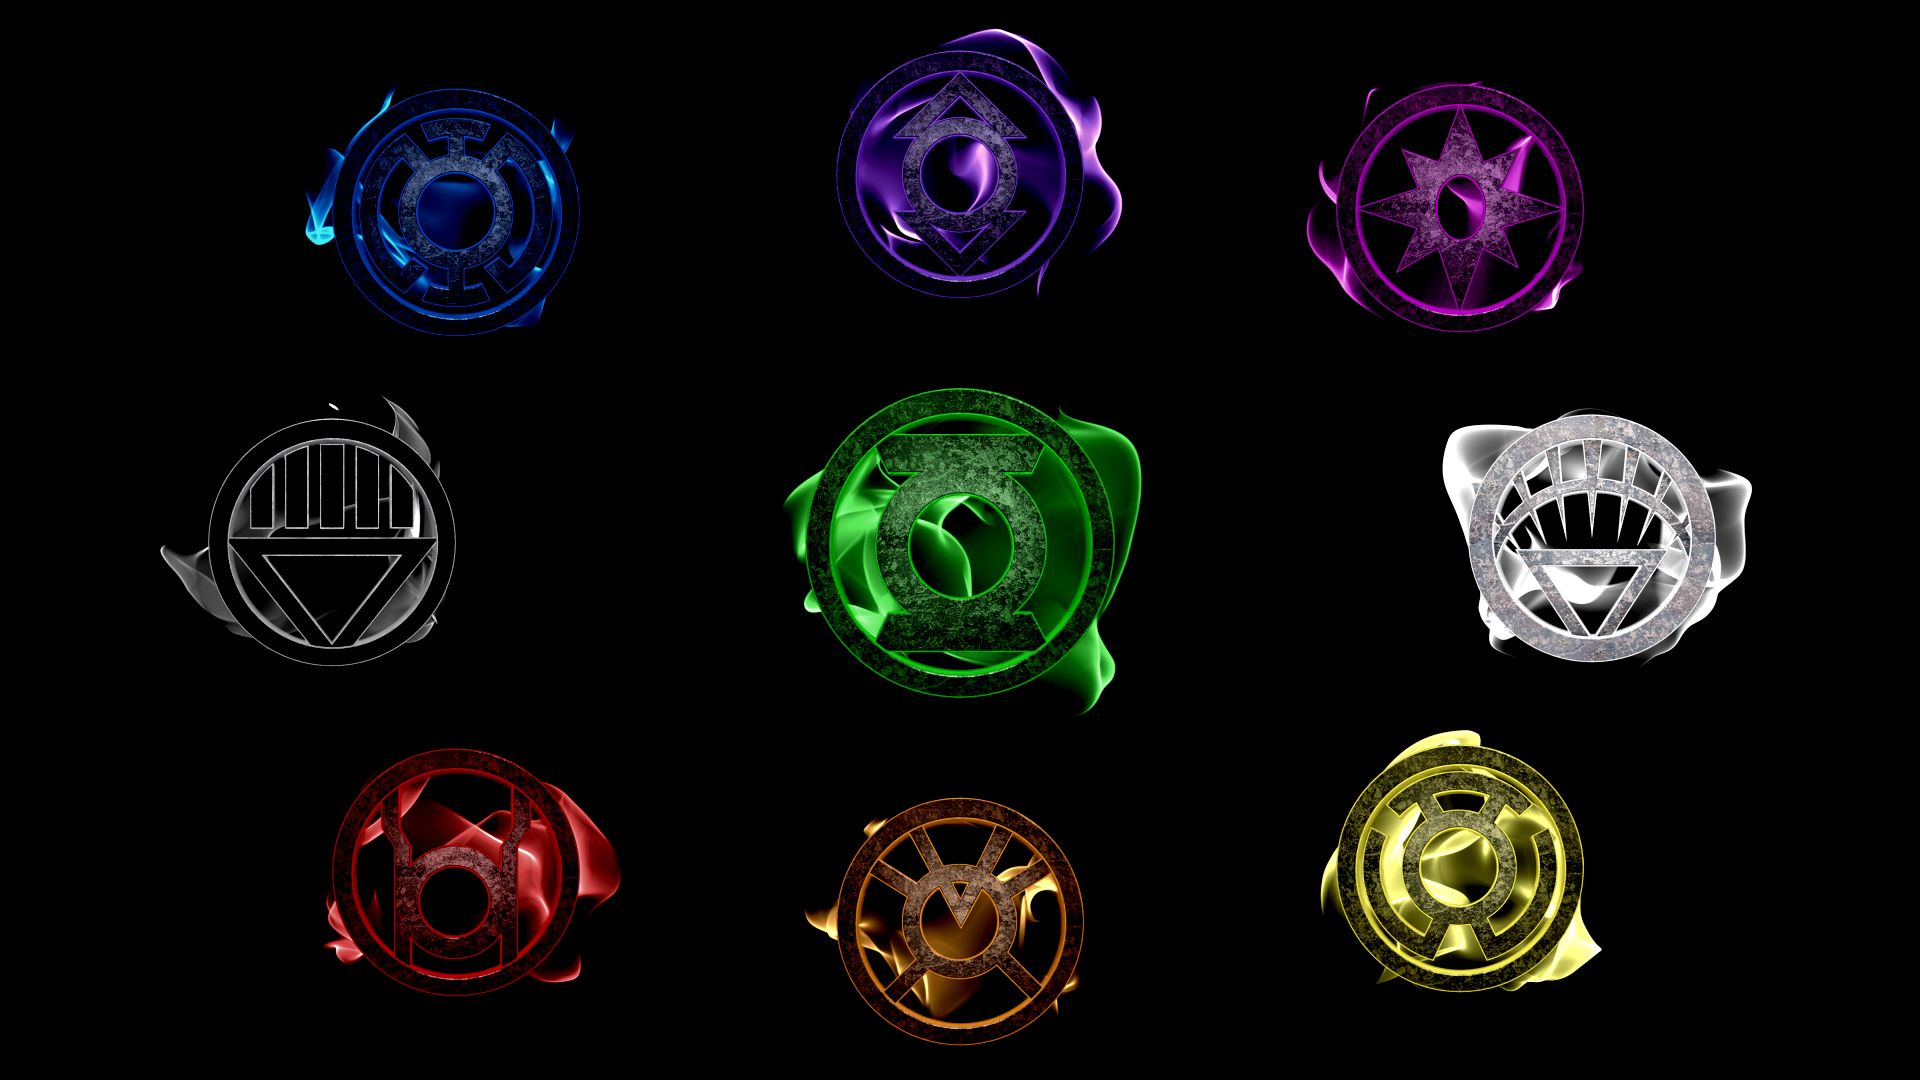 Free download Lantern Corps Logos Revised [1920x1080] ComicWalls [1920x1080] for your Desktop, Mobile & Tablet. Explore Lantern Corps Wallpaper. Green Lantern Wallpaper, Green Lantern Logo Wallpaper, Blue Lantern Wallpaper